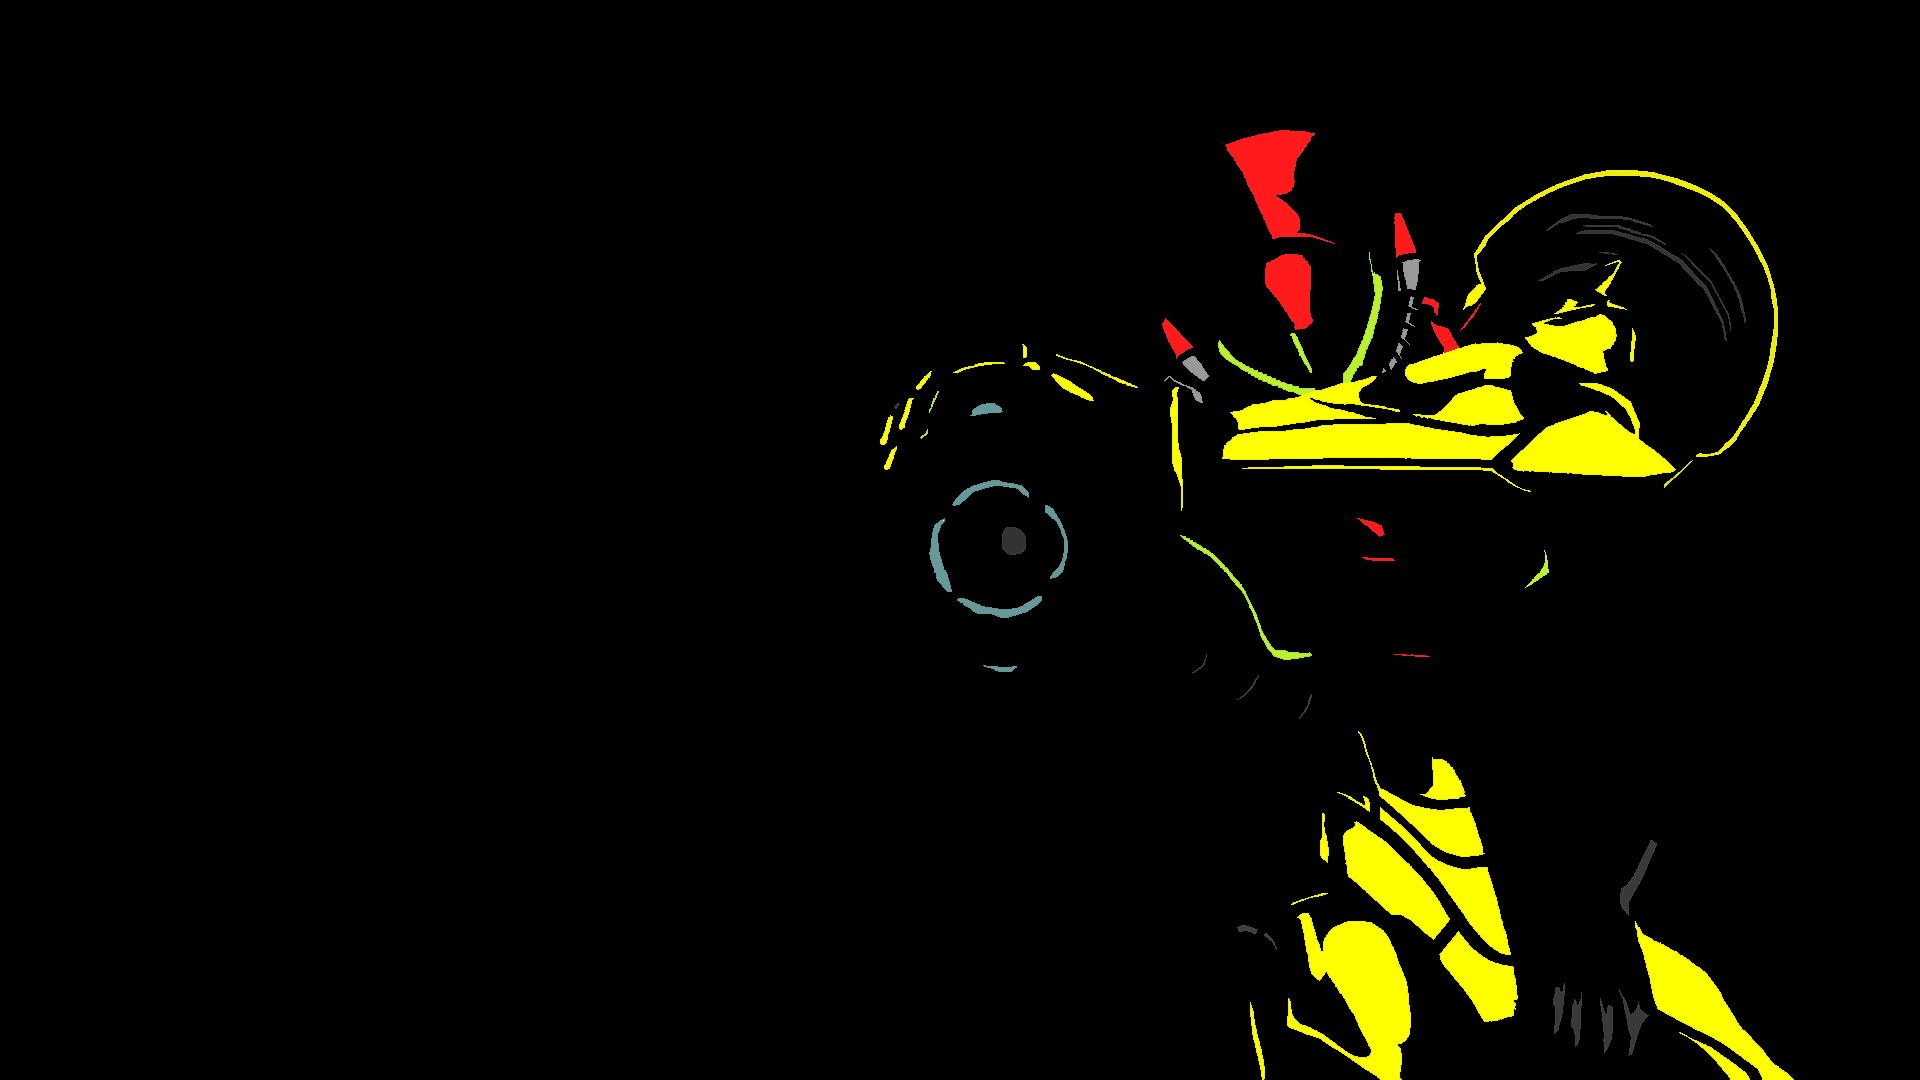 What Metroid wallpaper do you use for your desktop background